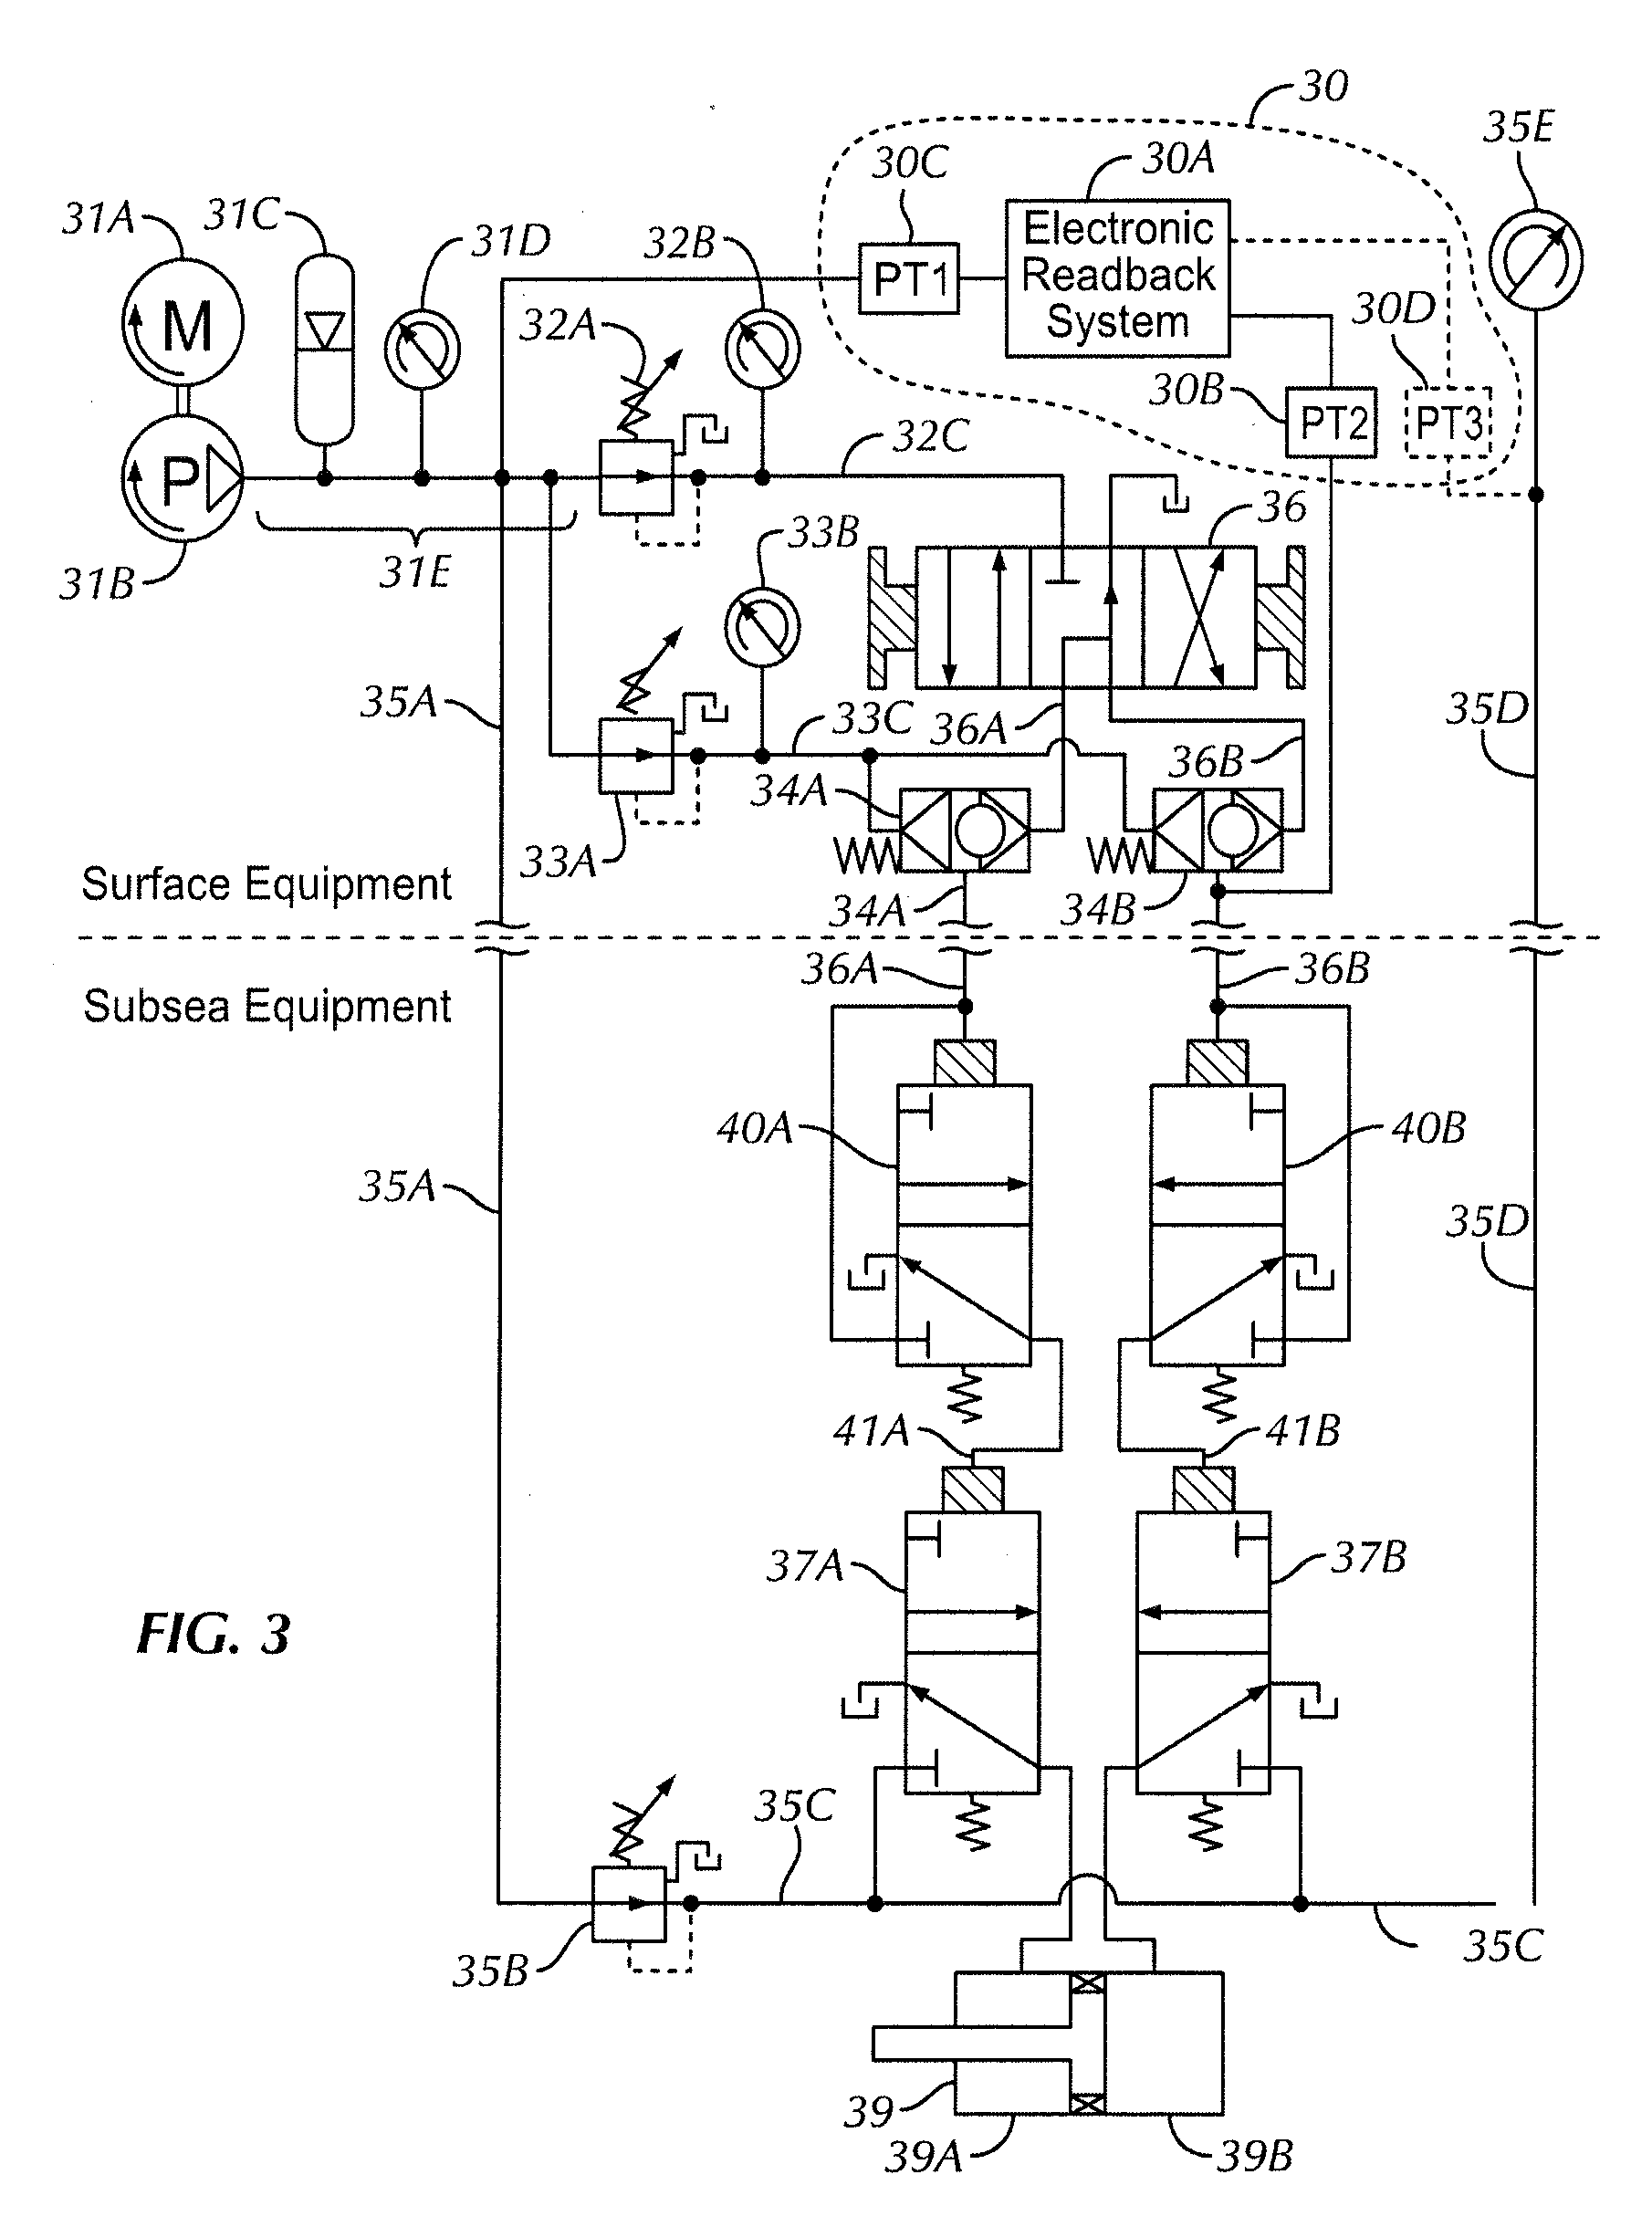 Hydraulic control system monitoring apparatus and method